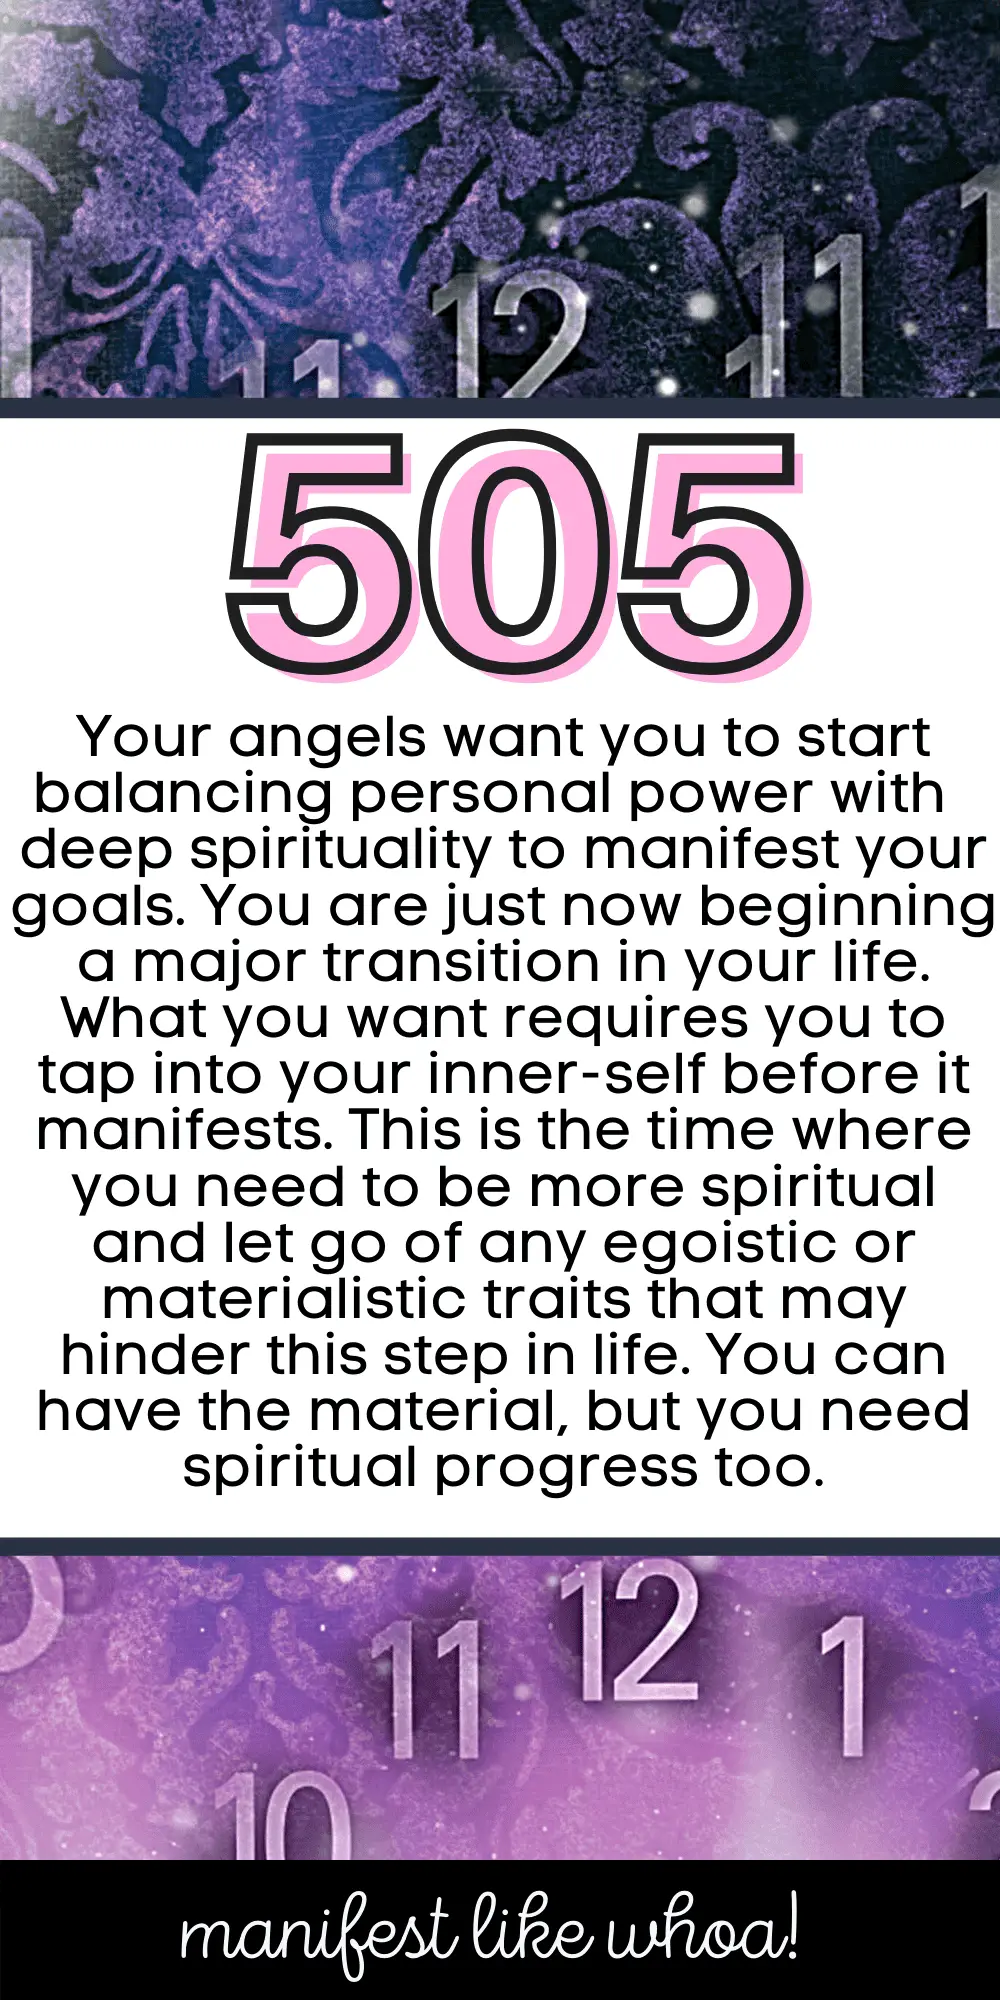 What Is The Numerology Of The Number 505?